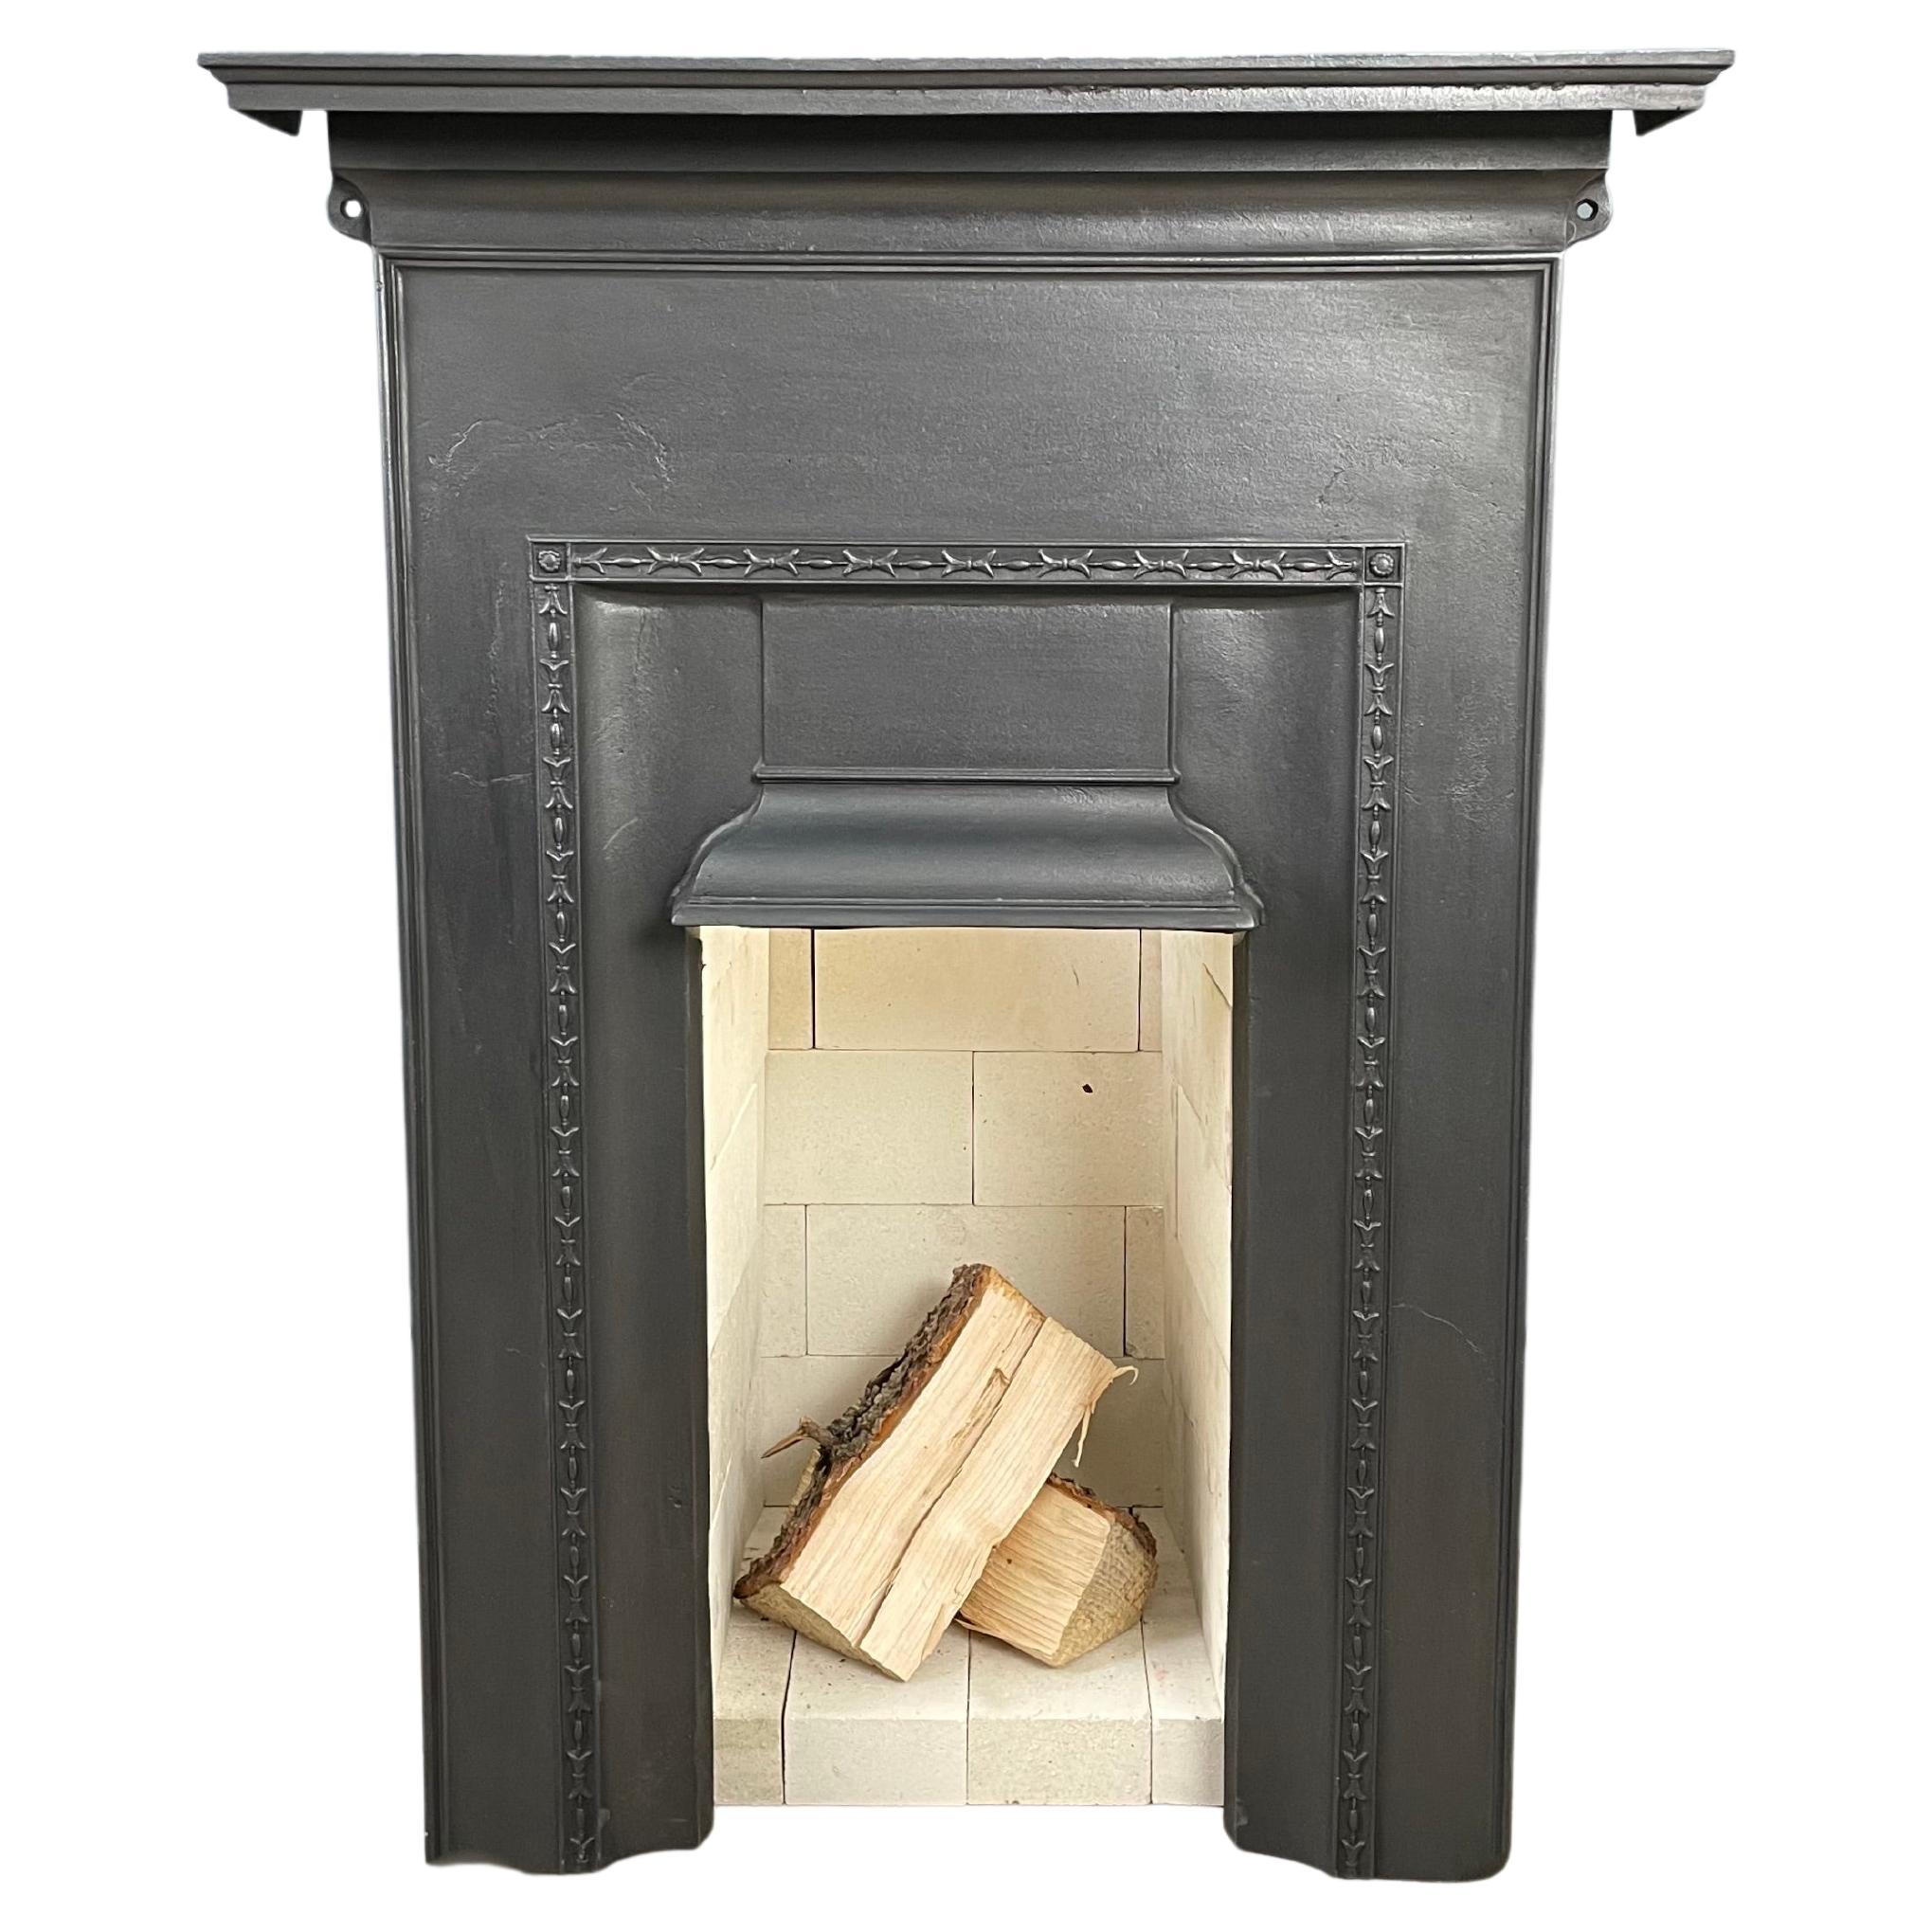 How can I tell if a cast iron fireplace is real?